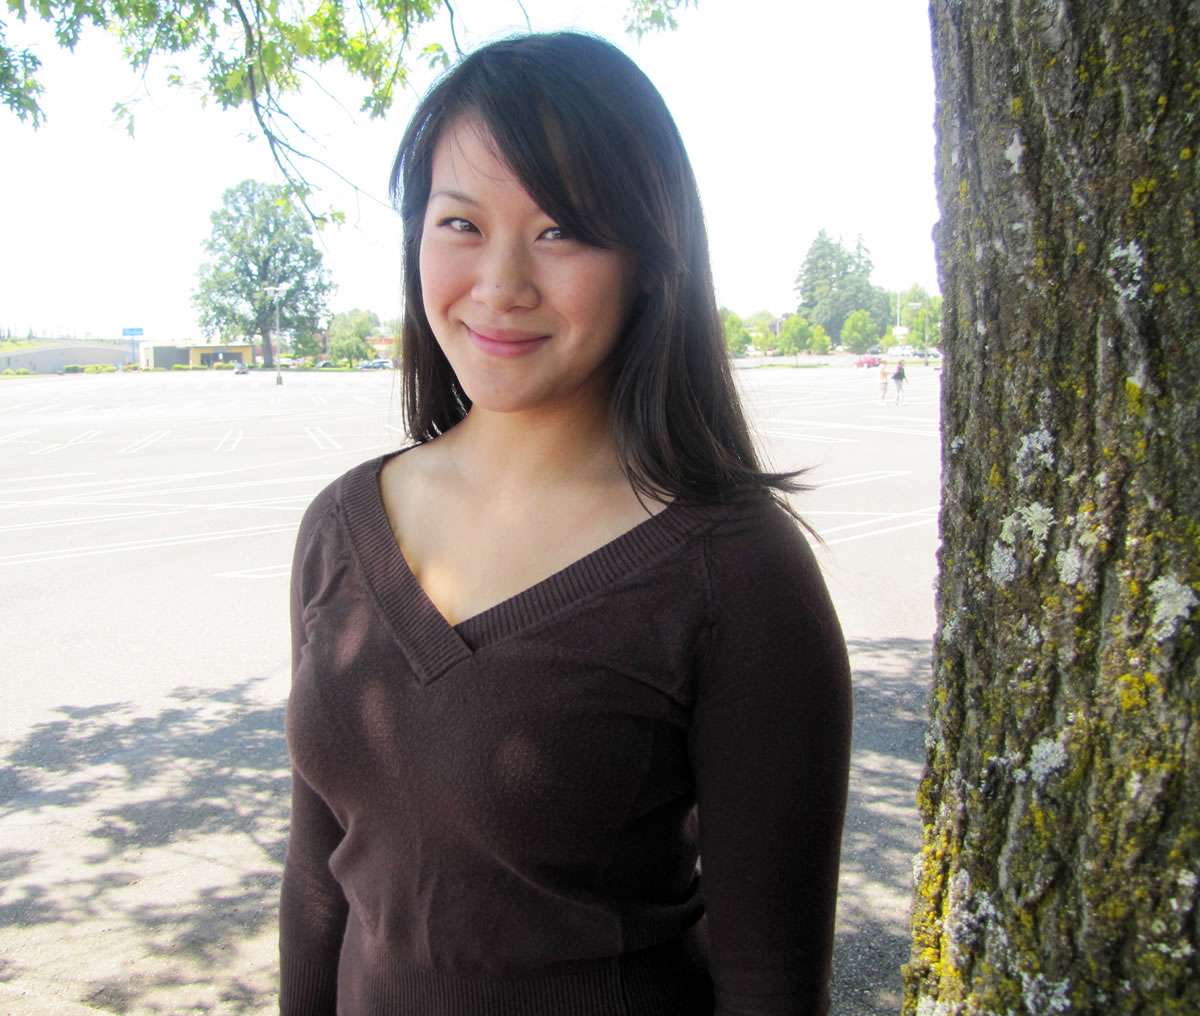 Priscilla Dang fought off two teen boys who accosted her while she was jogging along the Padden Parkway path on June 15.